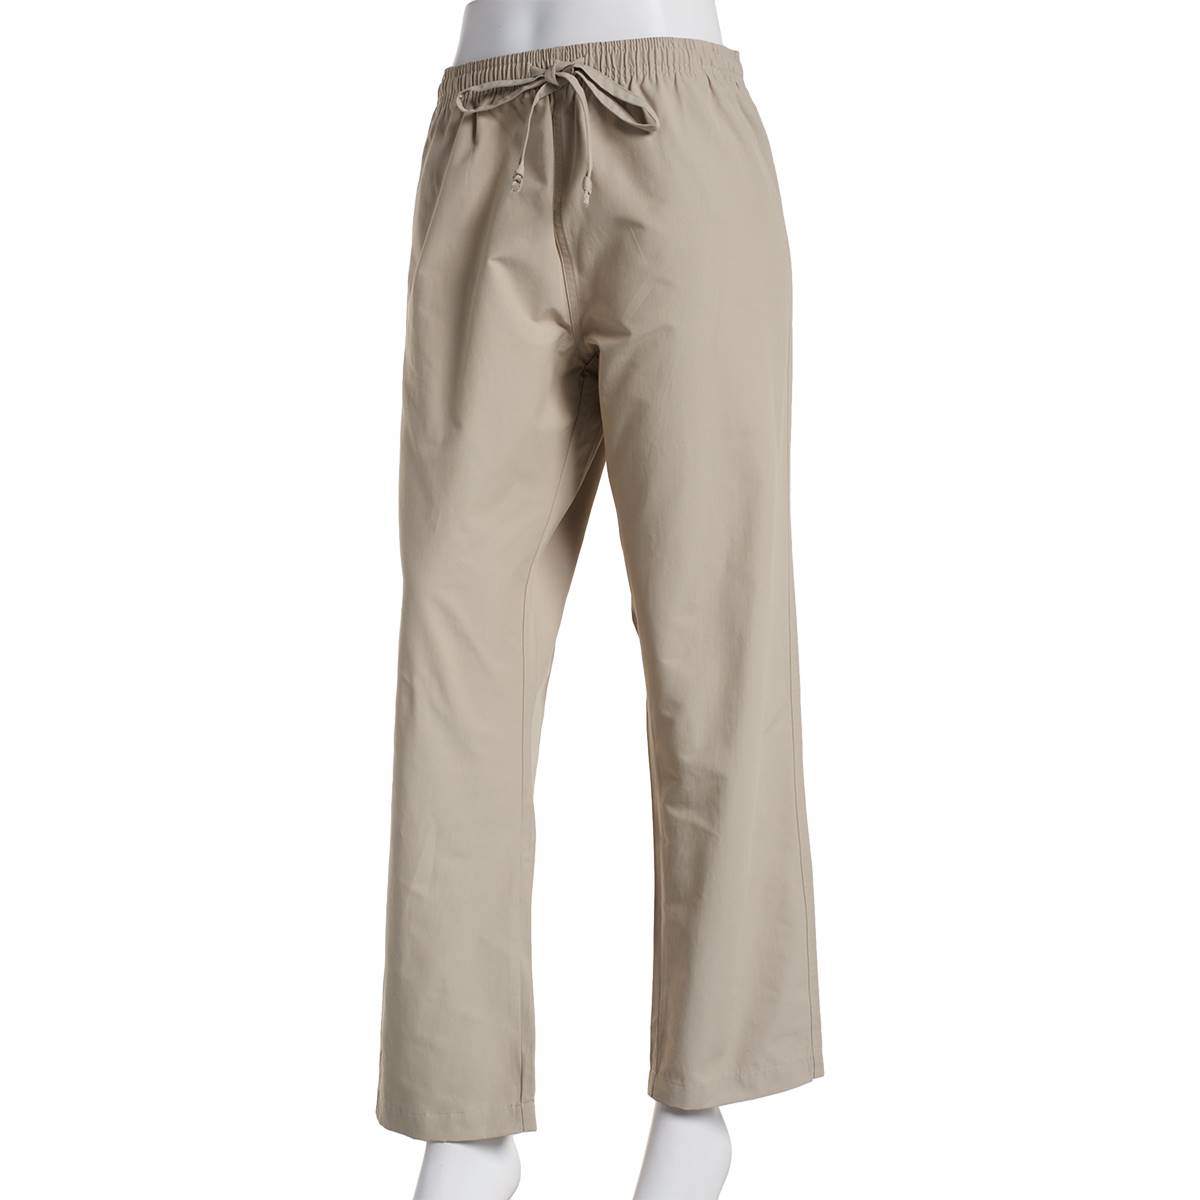 Petite Hasting & Smith Sheeting Casual Pants